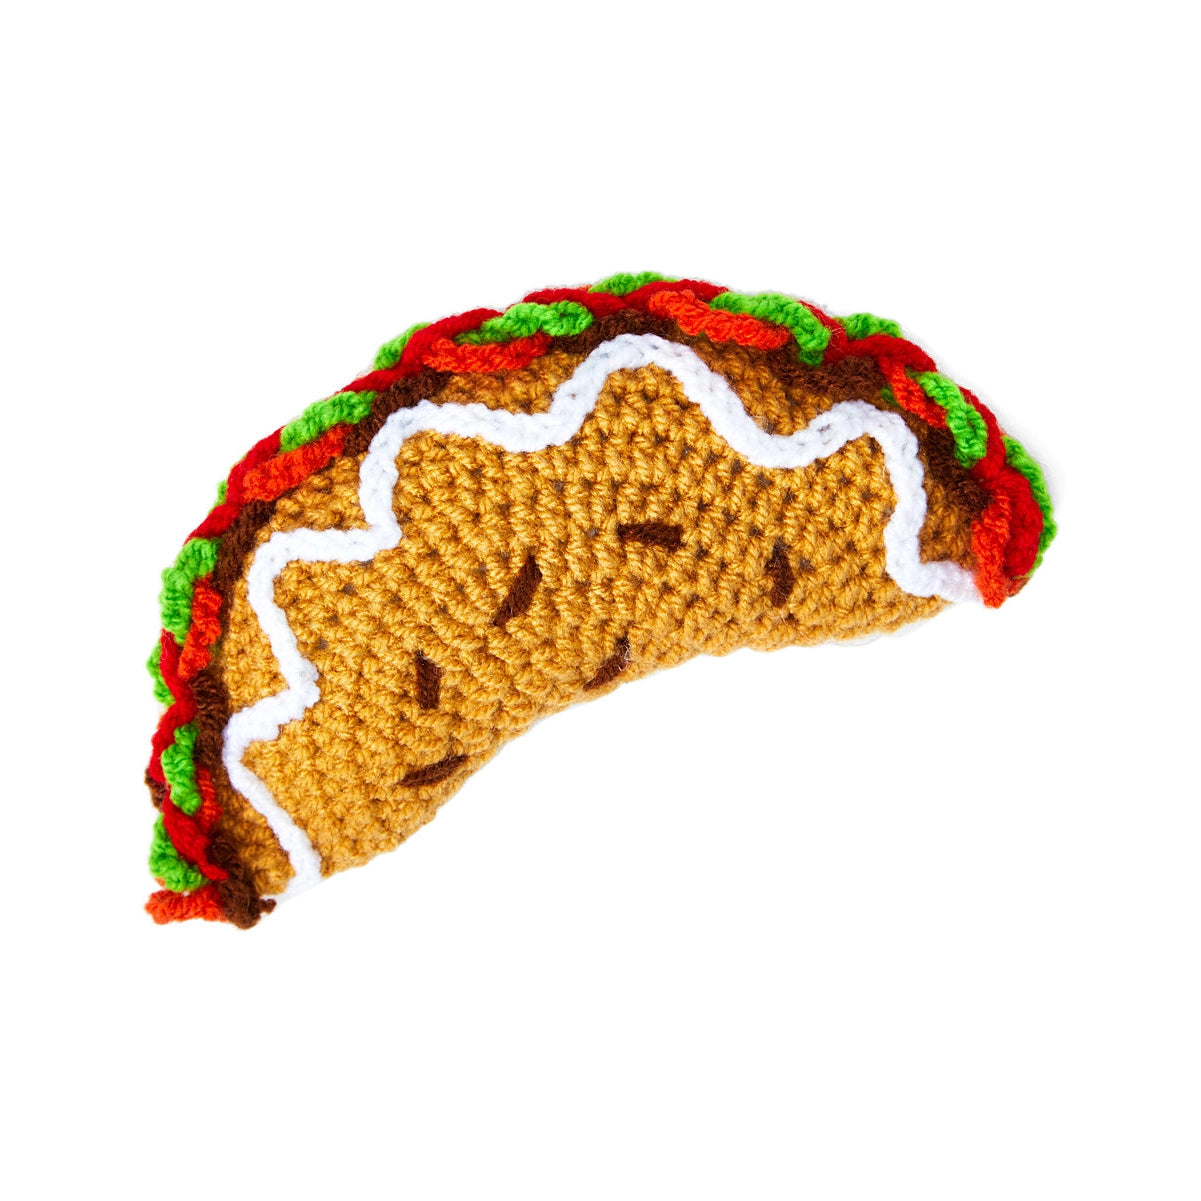 Hand crocheted brown, red and green taco rattle with white "sour cream" drizzle accent.